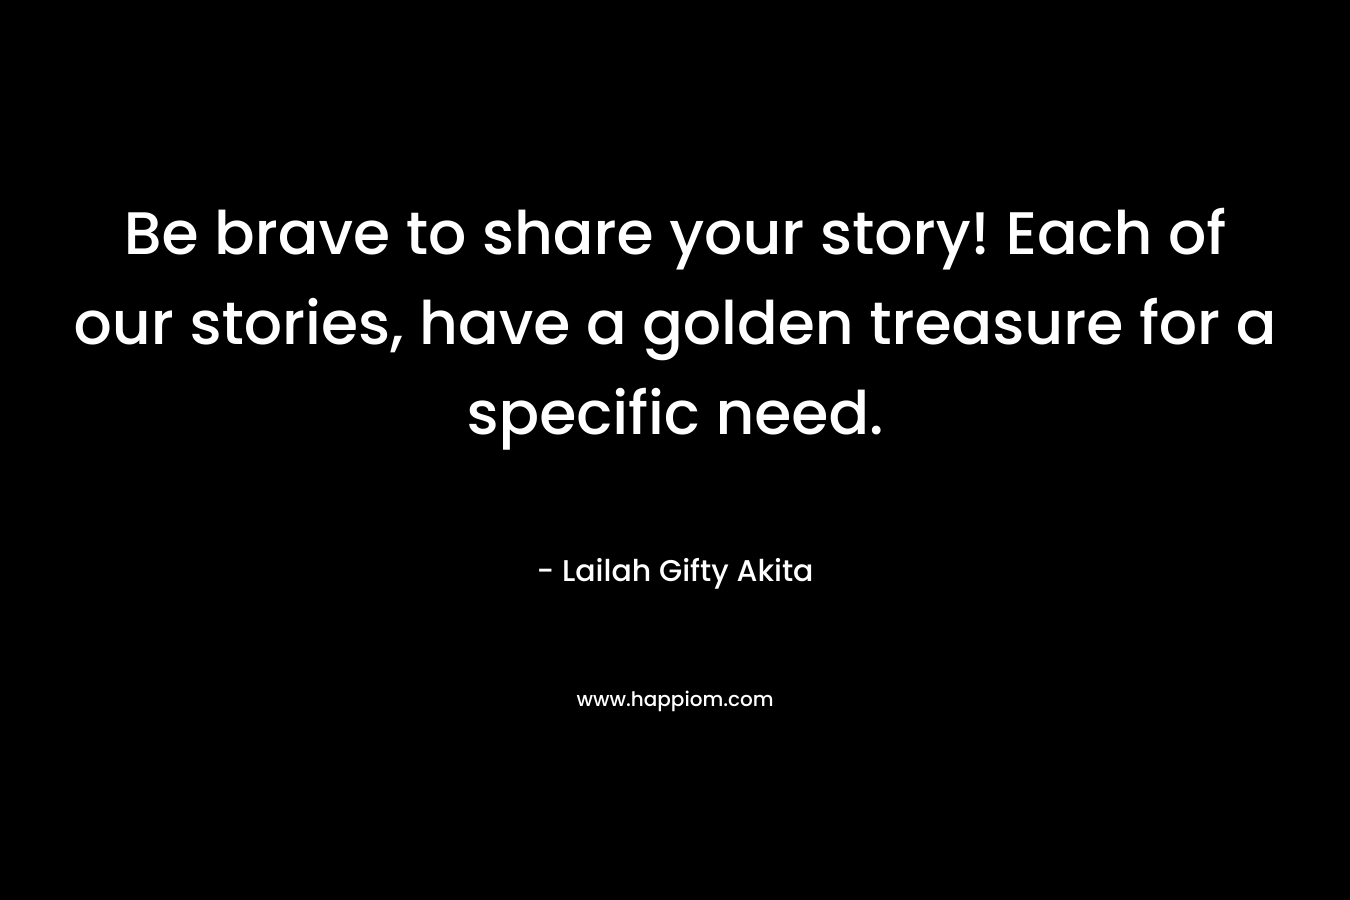 Be brave to share your story! Each of our stories, have a golden treasure for a specific need.